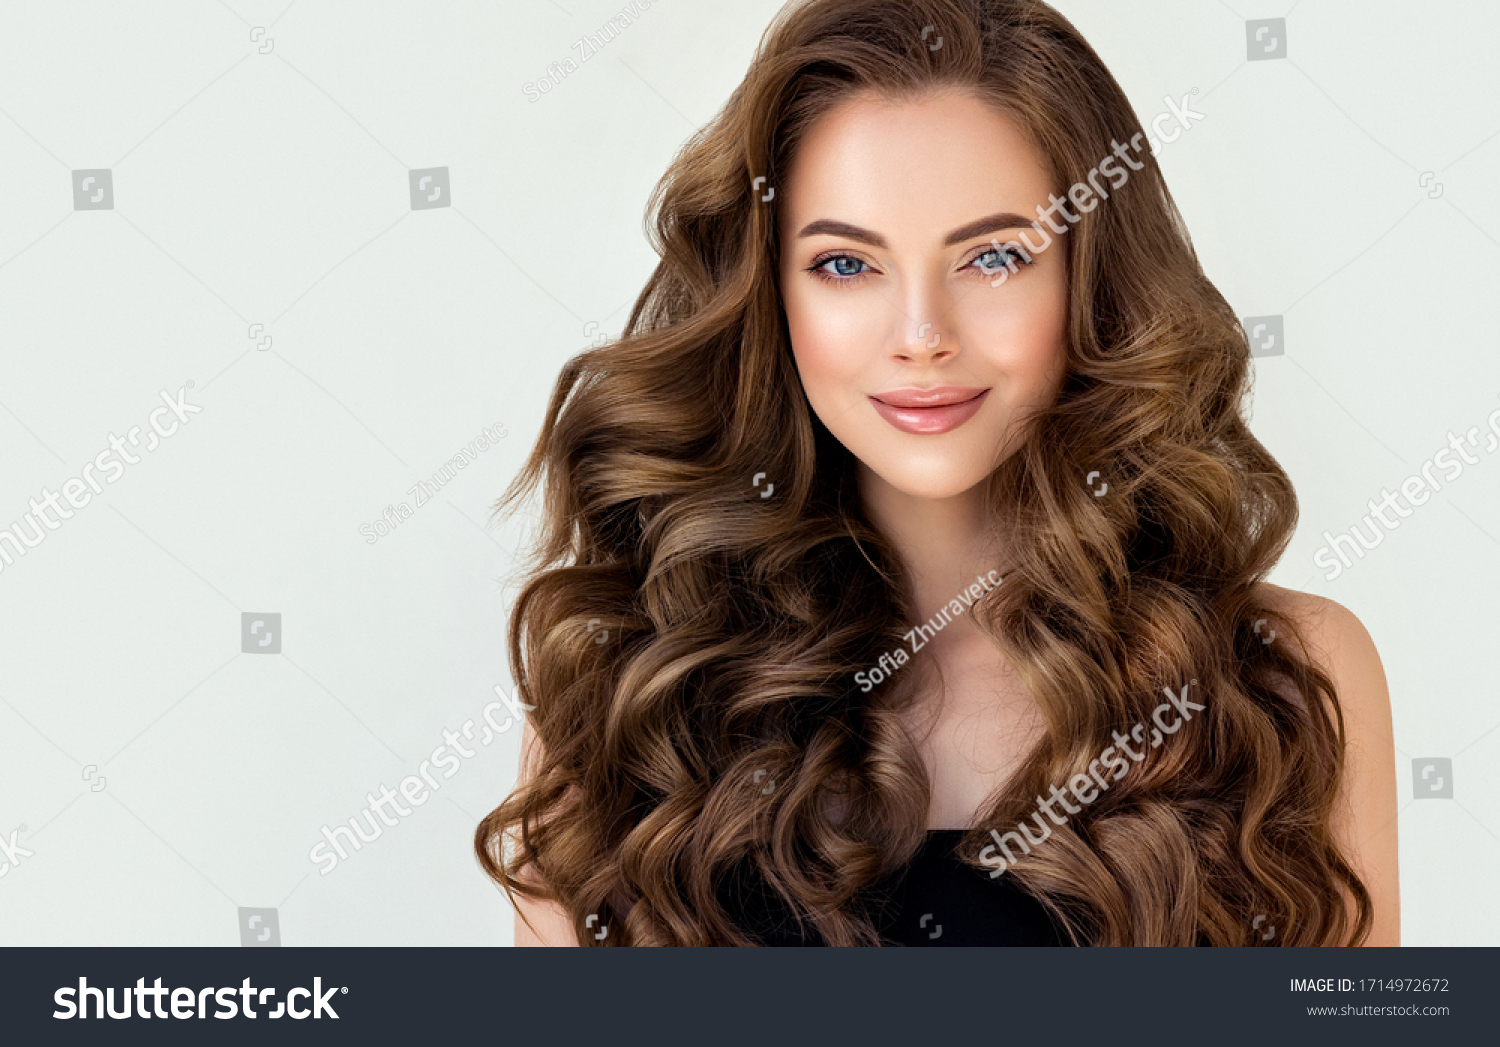 Beautiful laughing brunette model  girl  with long curly  hair . Smiling  woman hairstyle wavy curls . Red  nails manicure .    Fashion , beauty and makeup portrait
 #1714972672